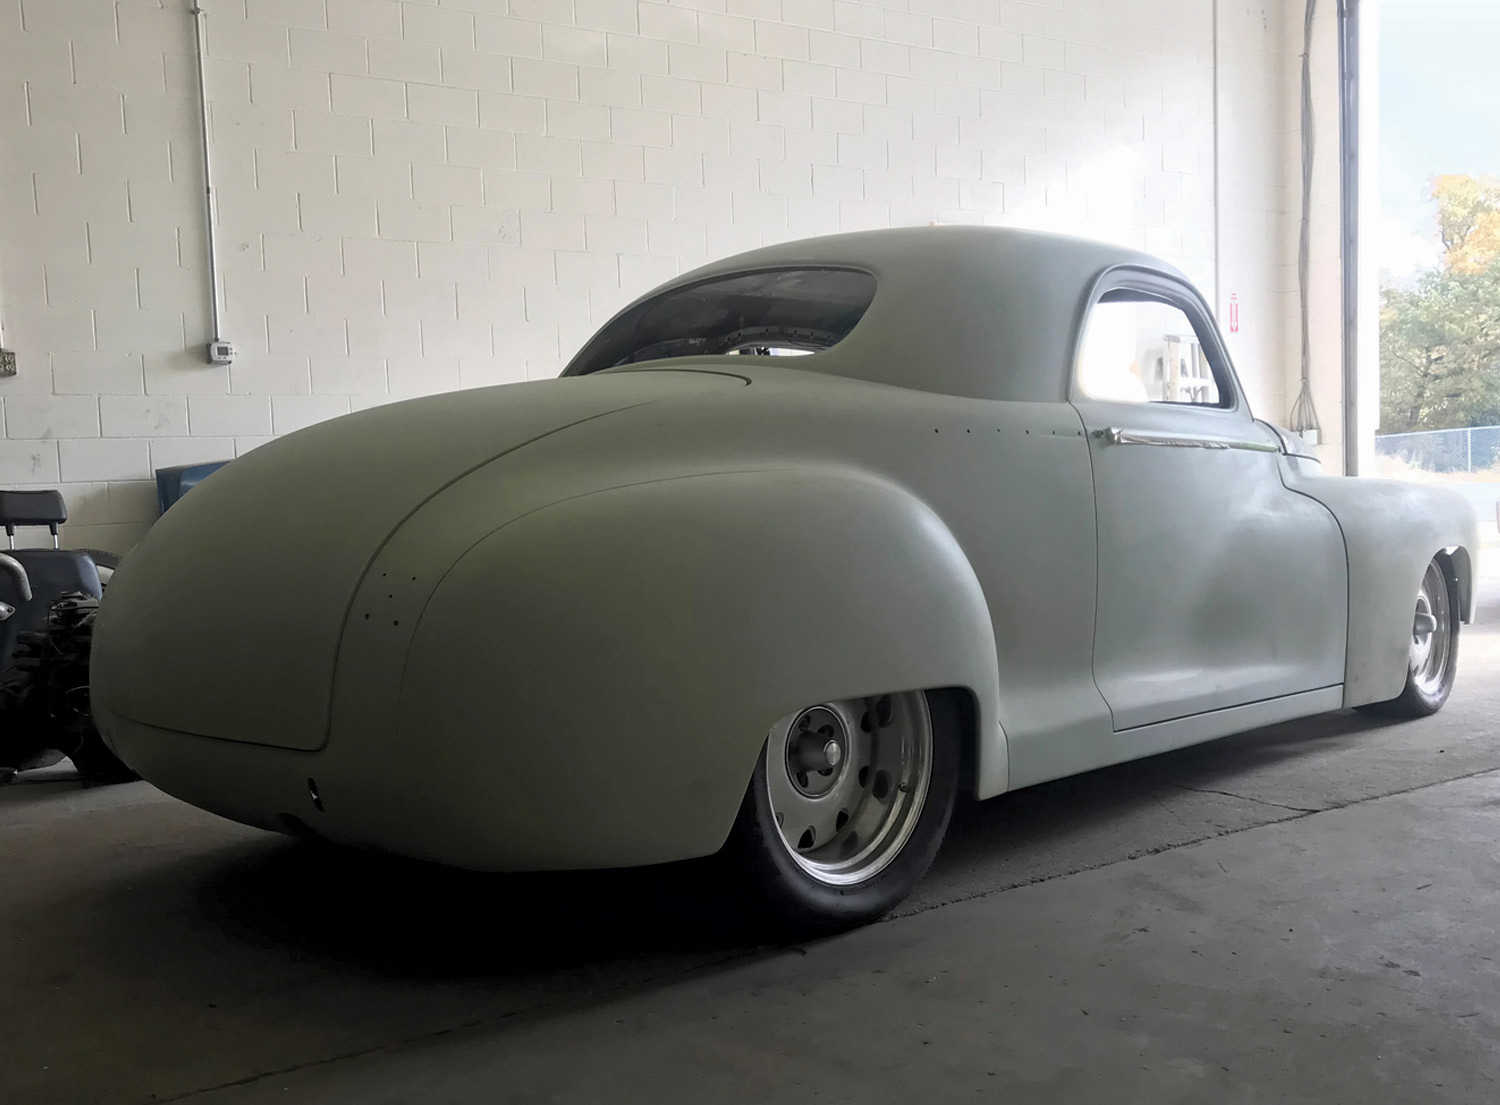 three quarter back view of Doug Melson’s ’47 Dodge parked in a garage, front toward the door